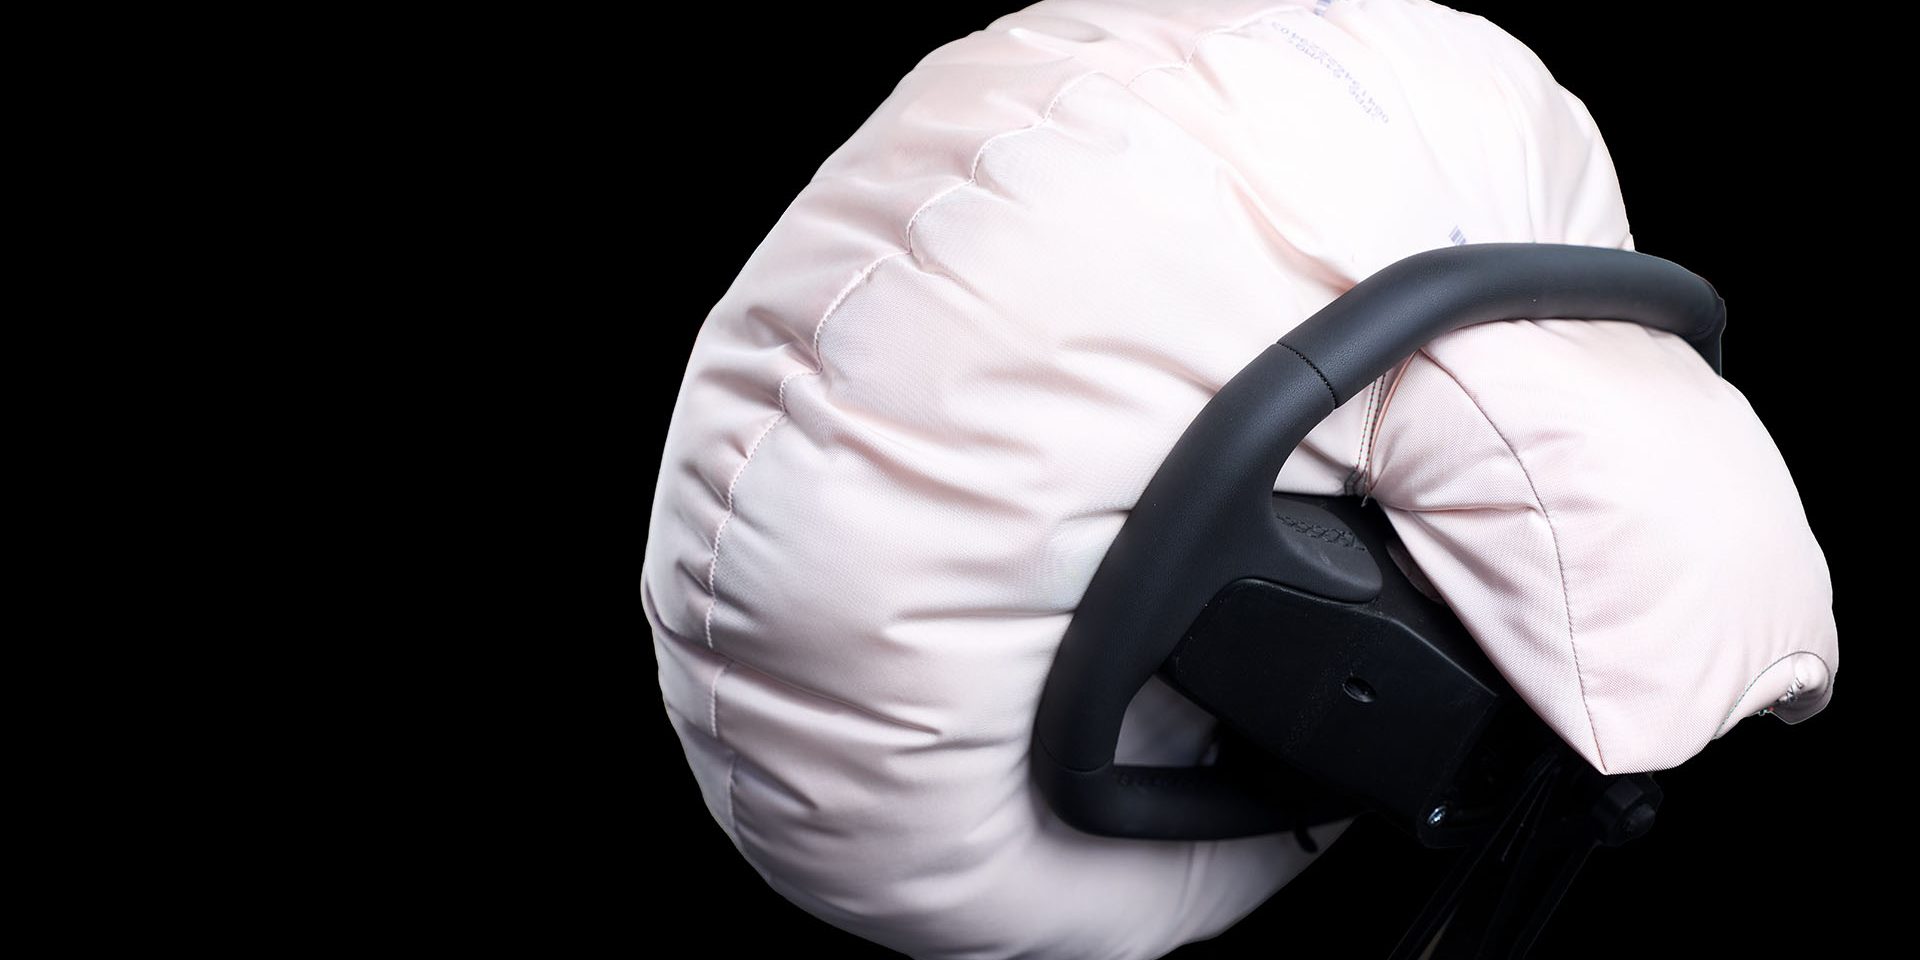 ZF LIFETEC rearranges driver airbag on the steering wheel and creates design freedom